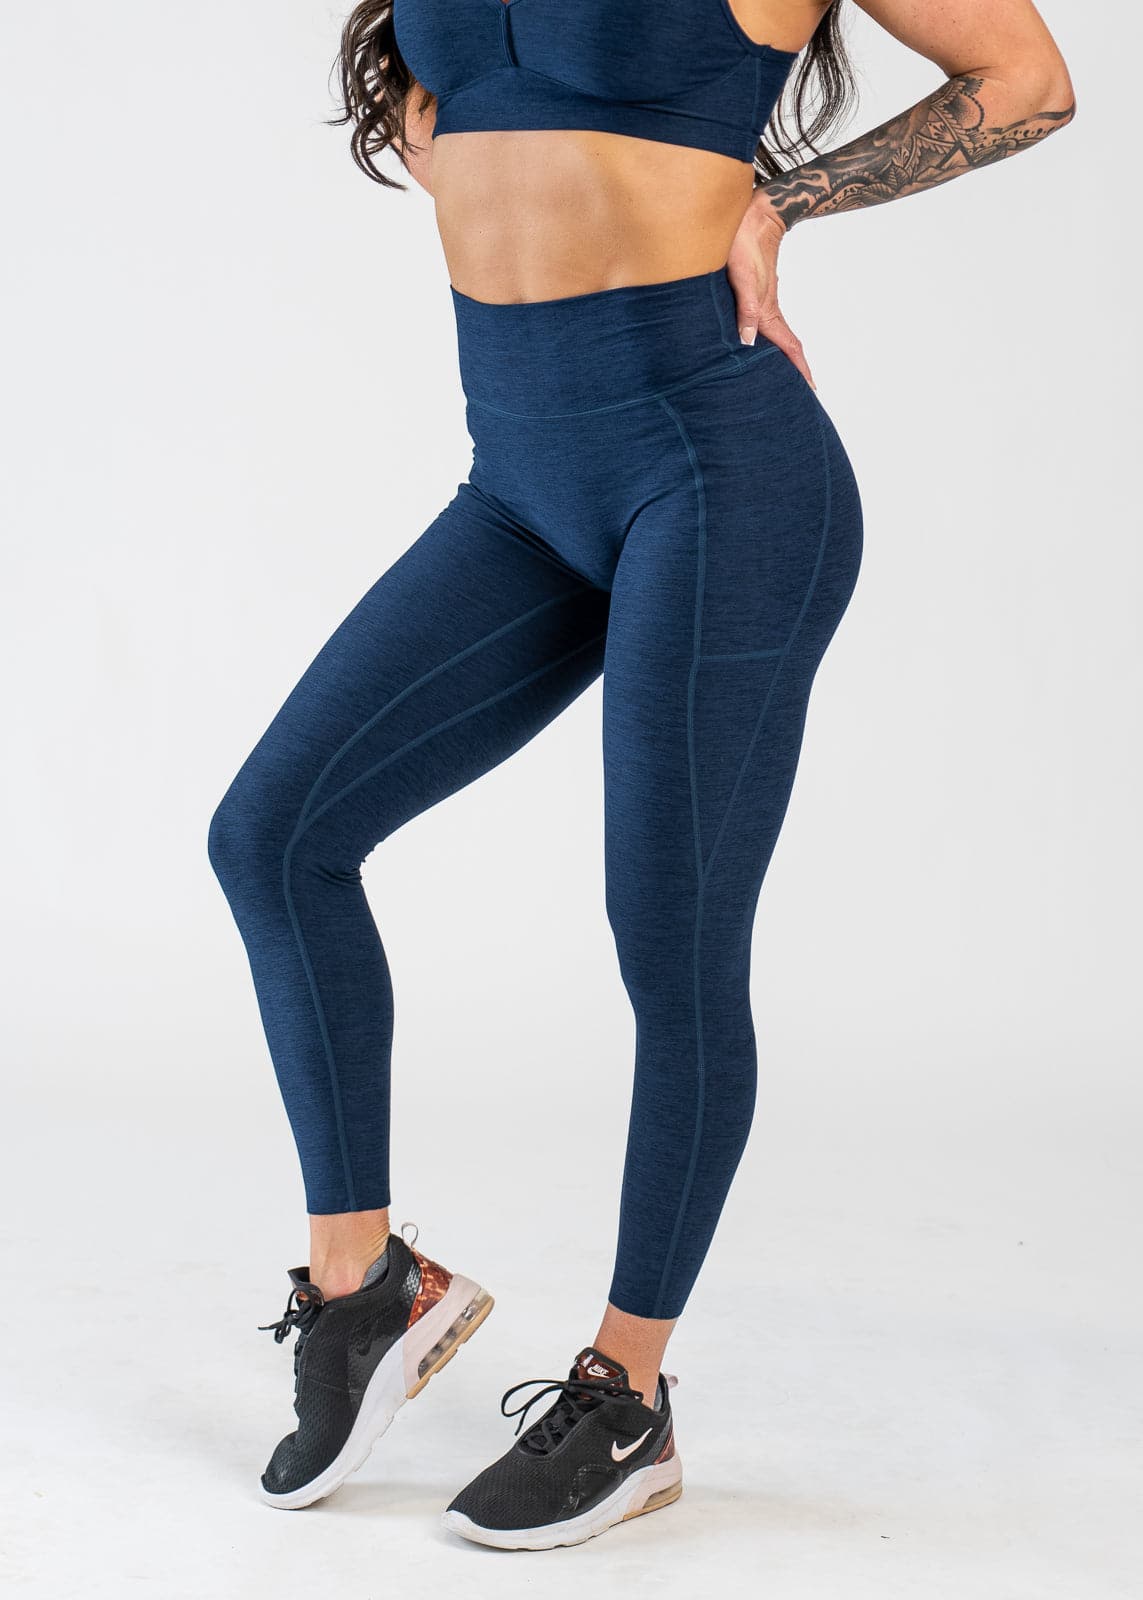 Chest Down 3/4 Front View With One Hand on Lower Back Wearing Dream Leggings With Pockets | Deep Blue